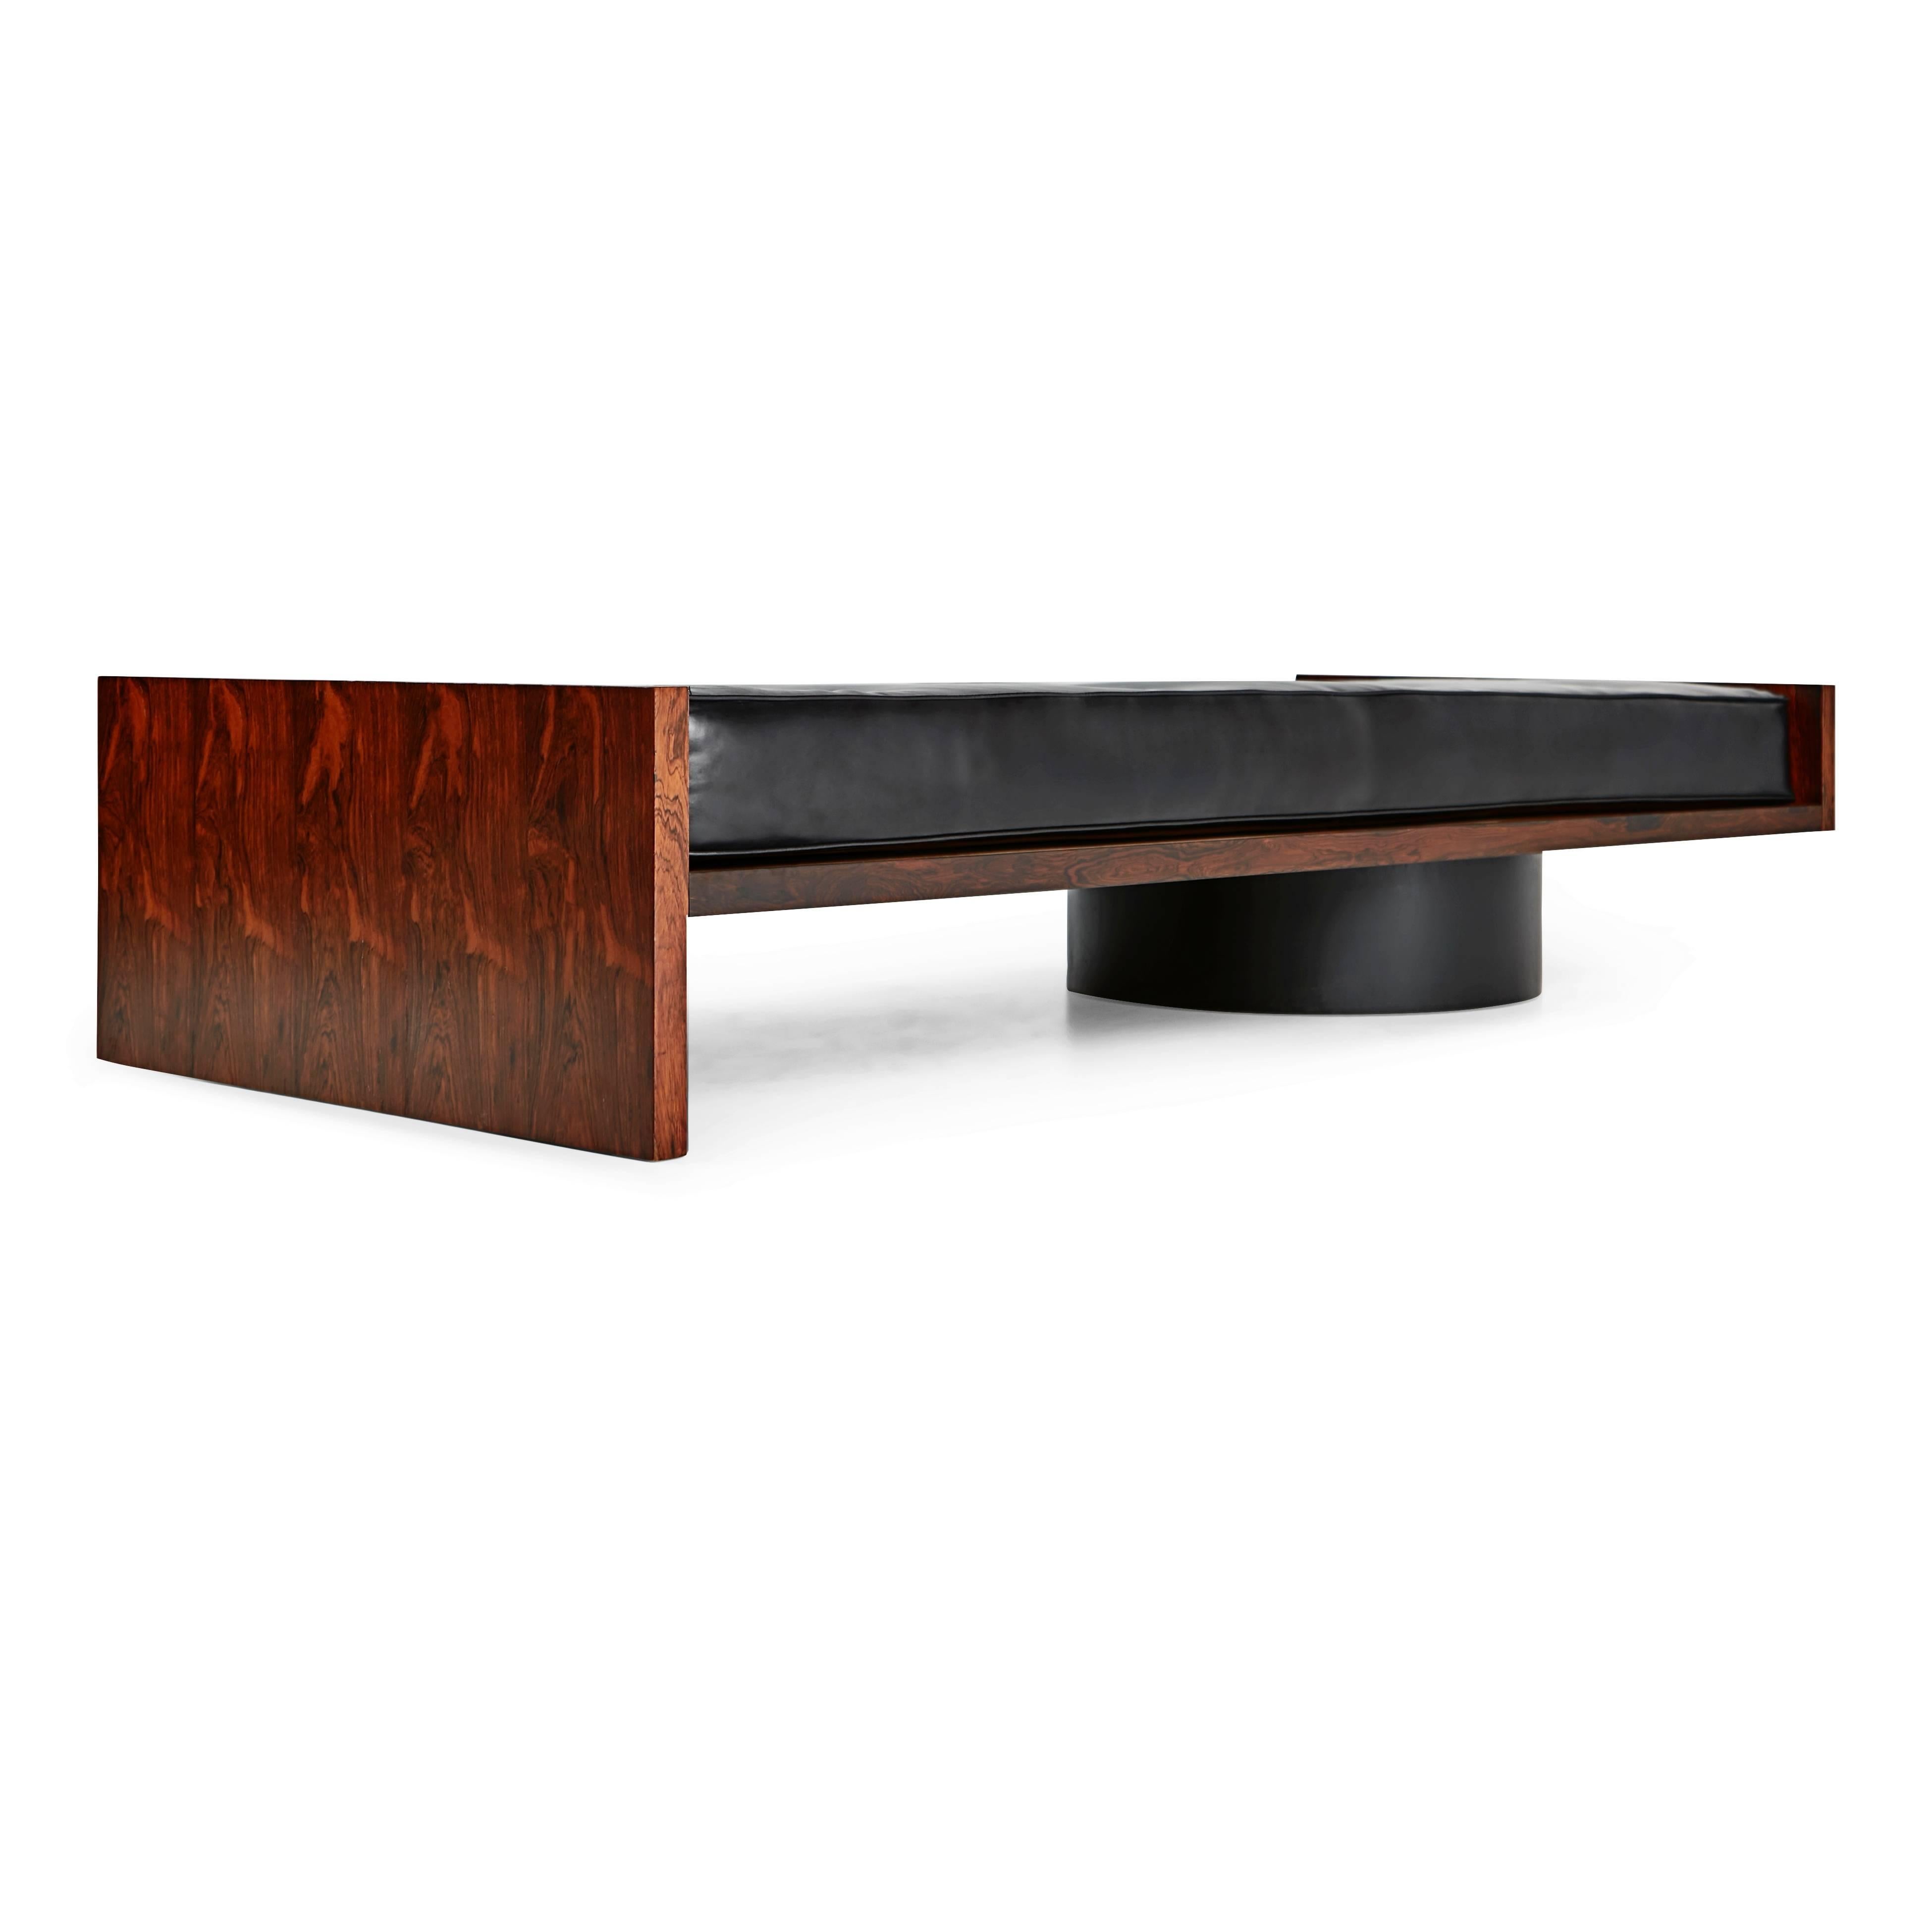 An incredibly unique jacaranda rosewood and black leather daybed designed by Joaquim Tenreiro. We recently acquired this rare find from a home in Rio de Janeiro, Brazil which was designed by Tenreiro in the 1960s. Most of the pieces in this home